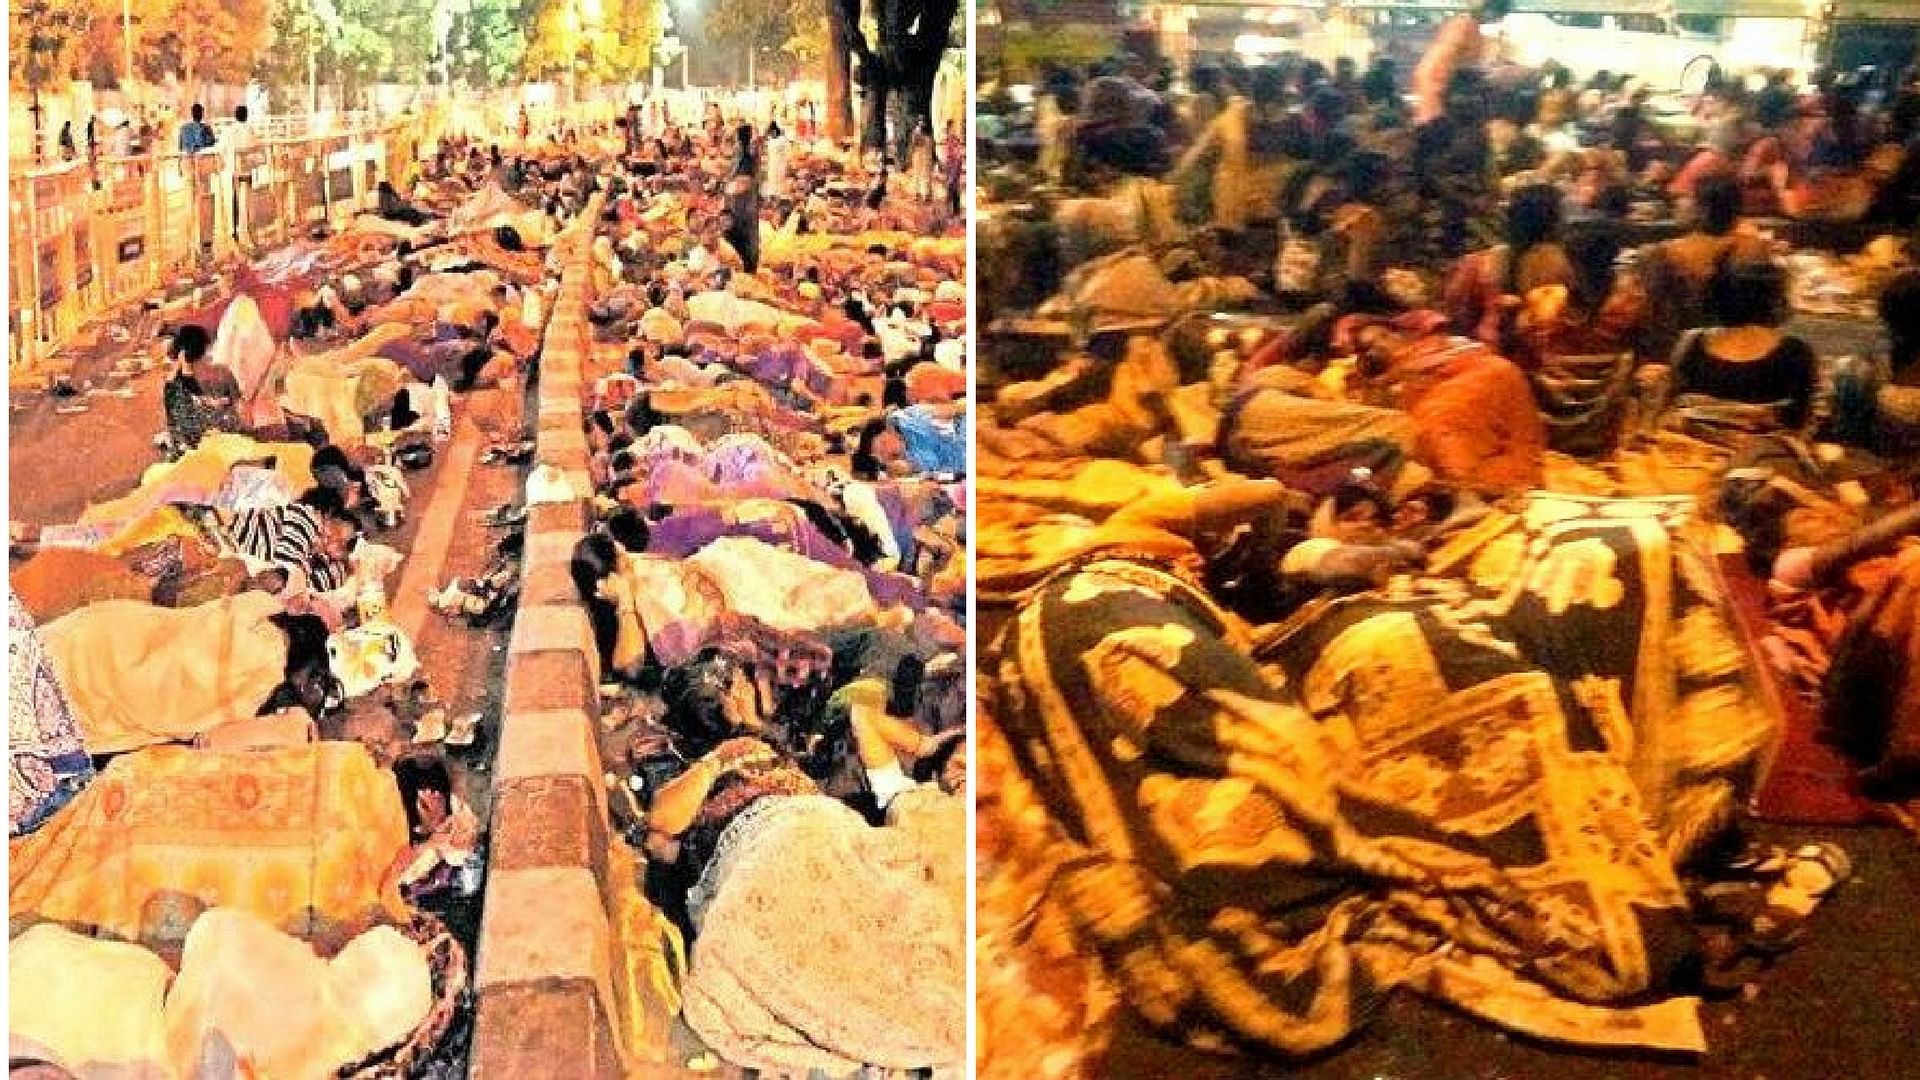 

The agitated women pulled out blankets from their bags and lay down to sleep on one of the busiest stretches in Bengaluru. (Photo Courtesy: The News Minute/Altered by The Quint) &nbsp; &nbsp;   